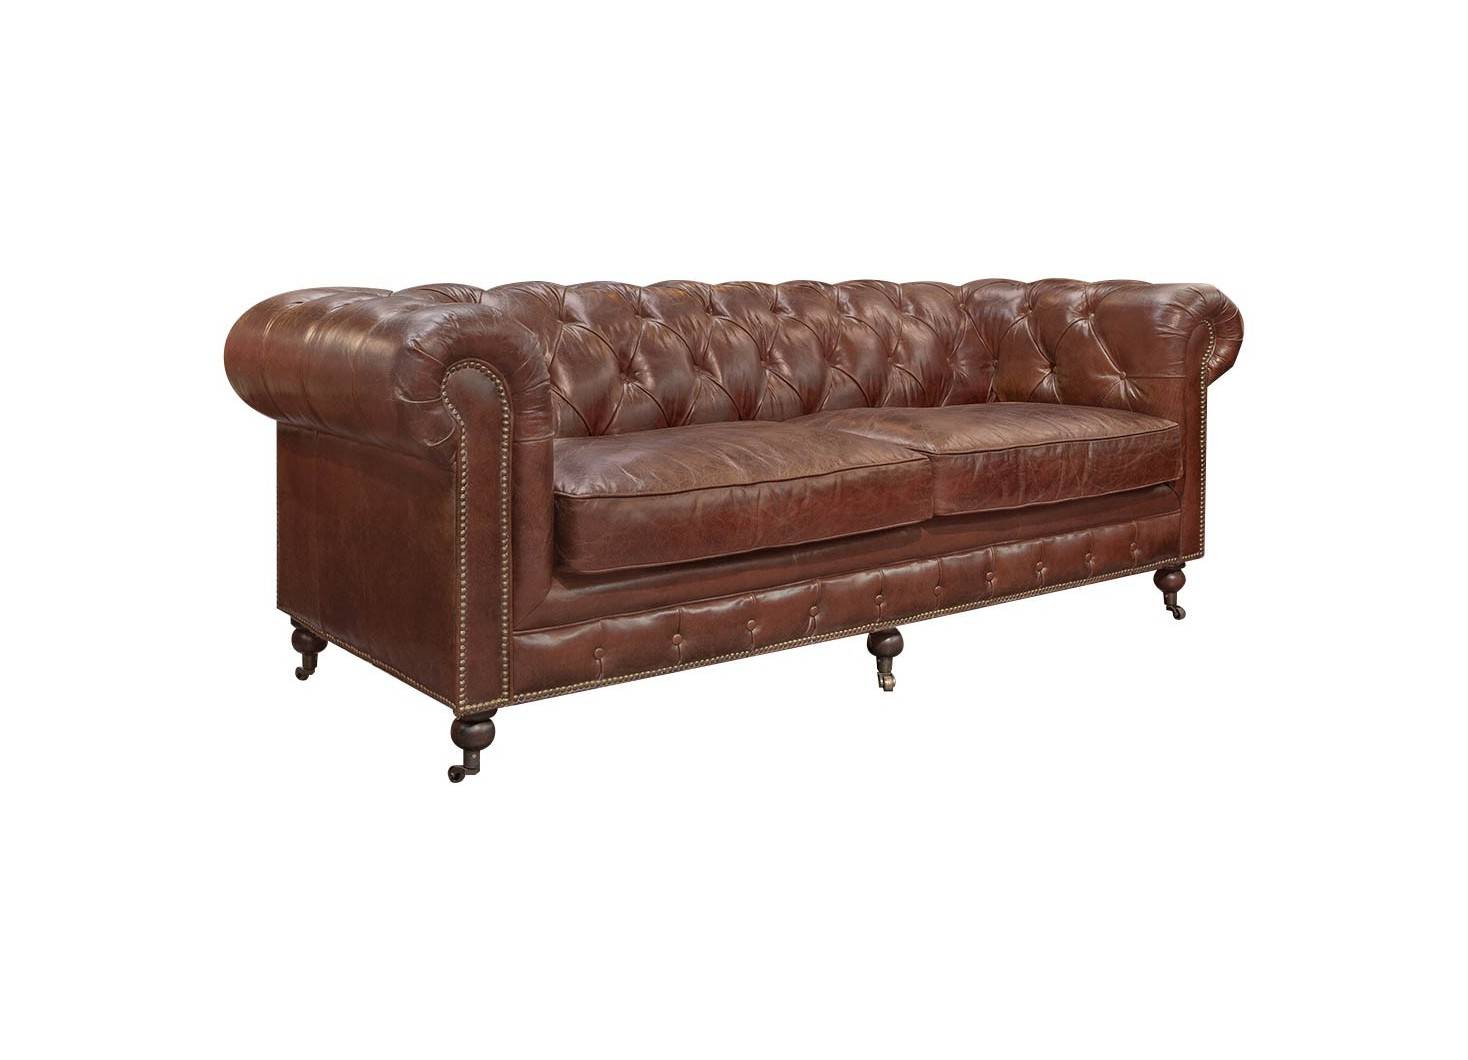 Chesterfield sofa 2 seaters